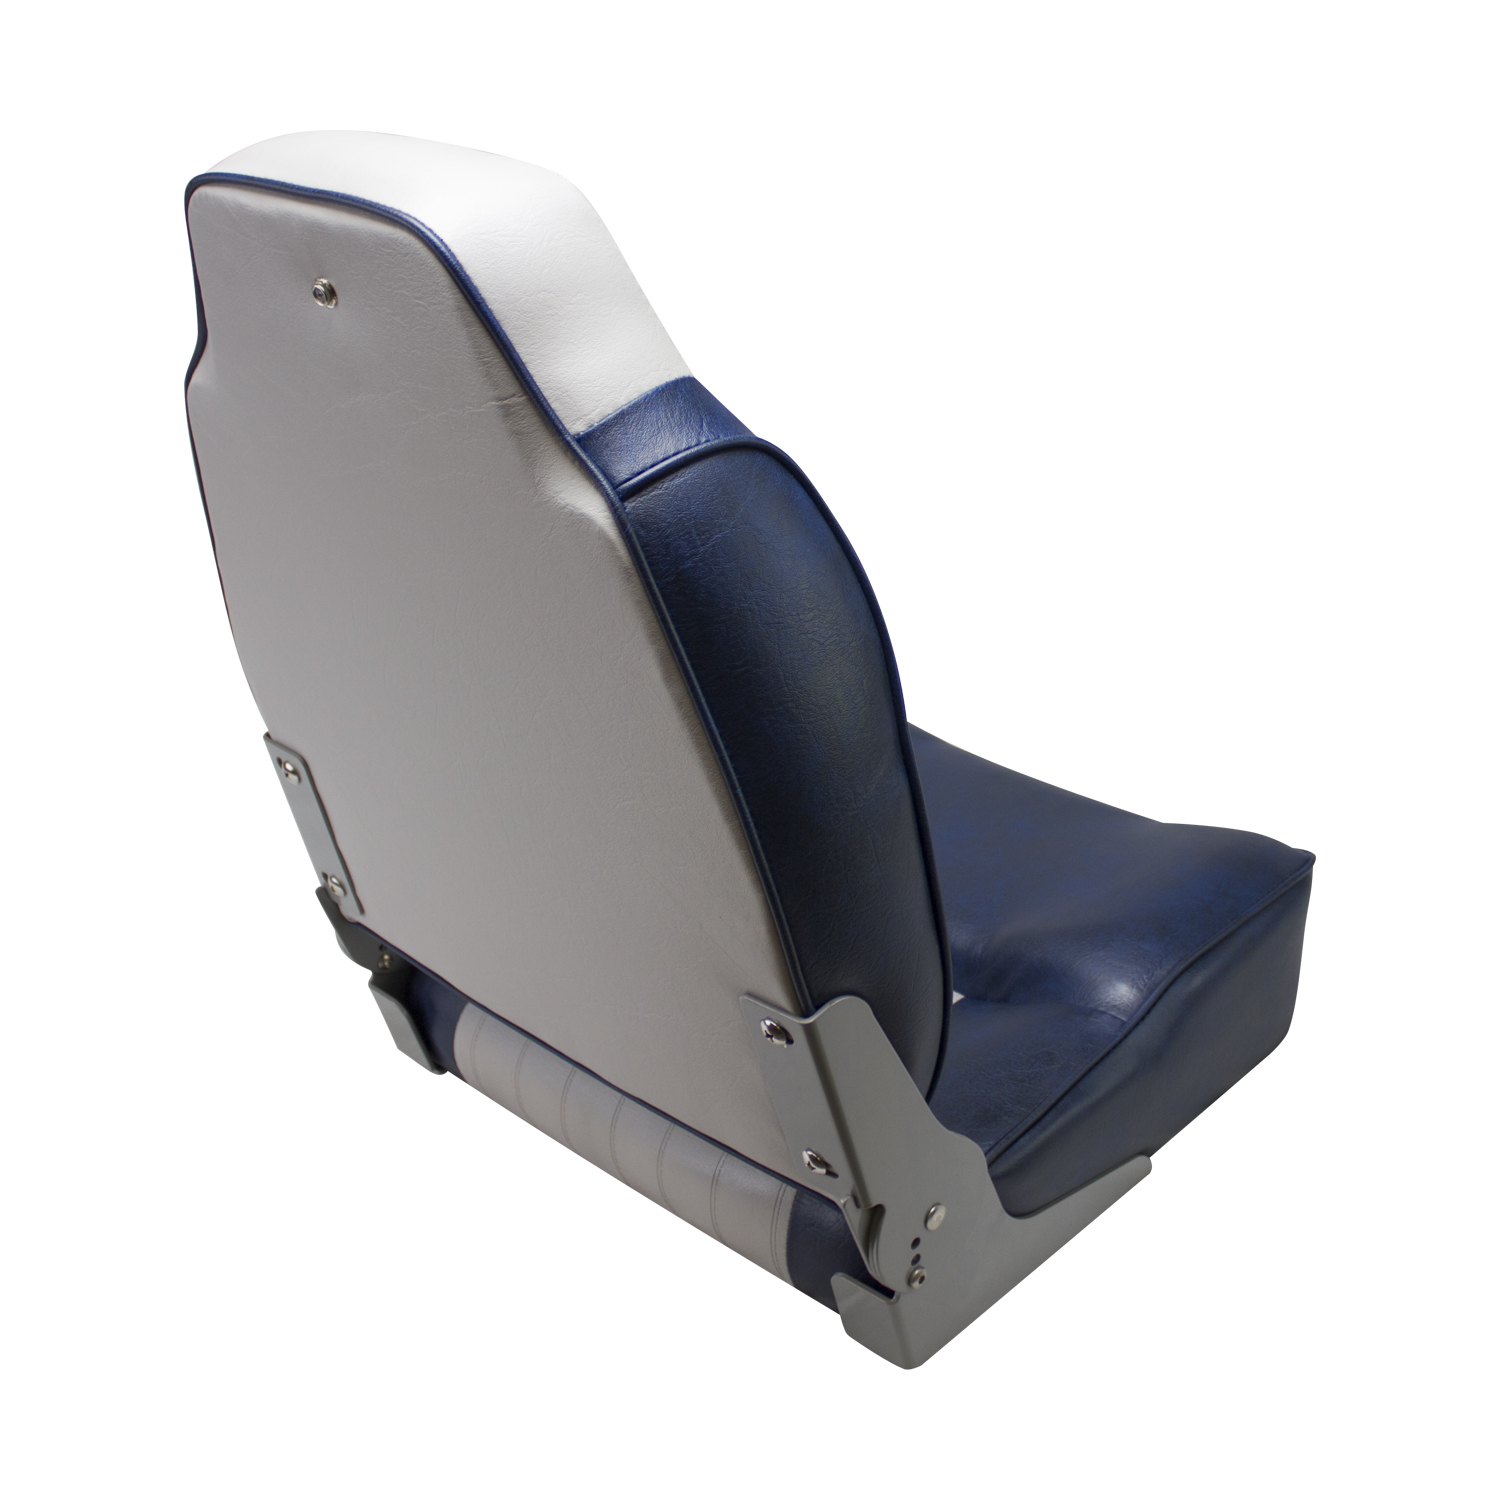 Wise 8WD640PLS-660 Lund Style High-Back Boat Seat, Grey / Navy - image 3 of 4